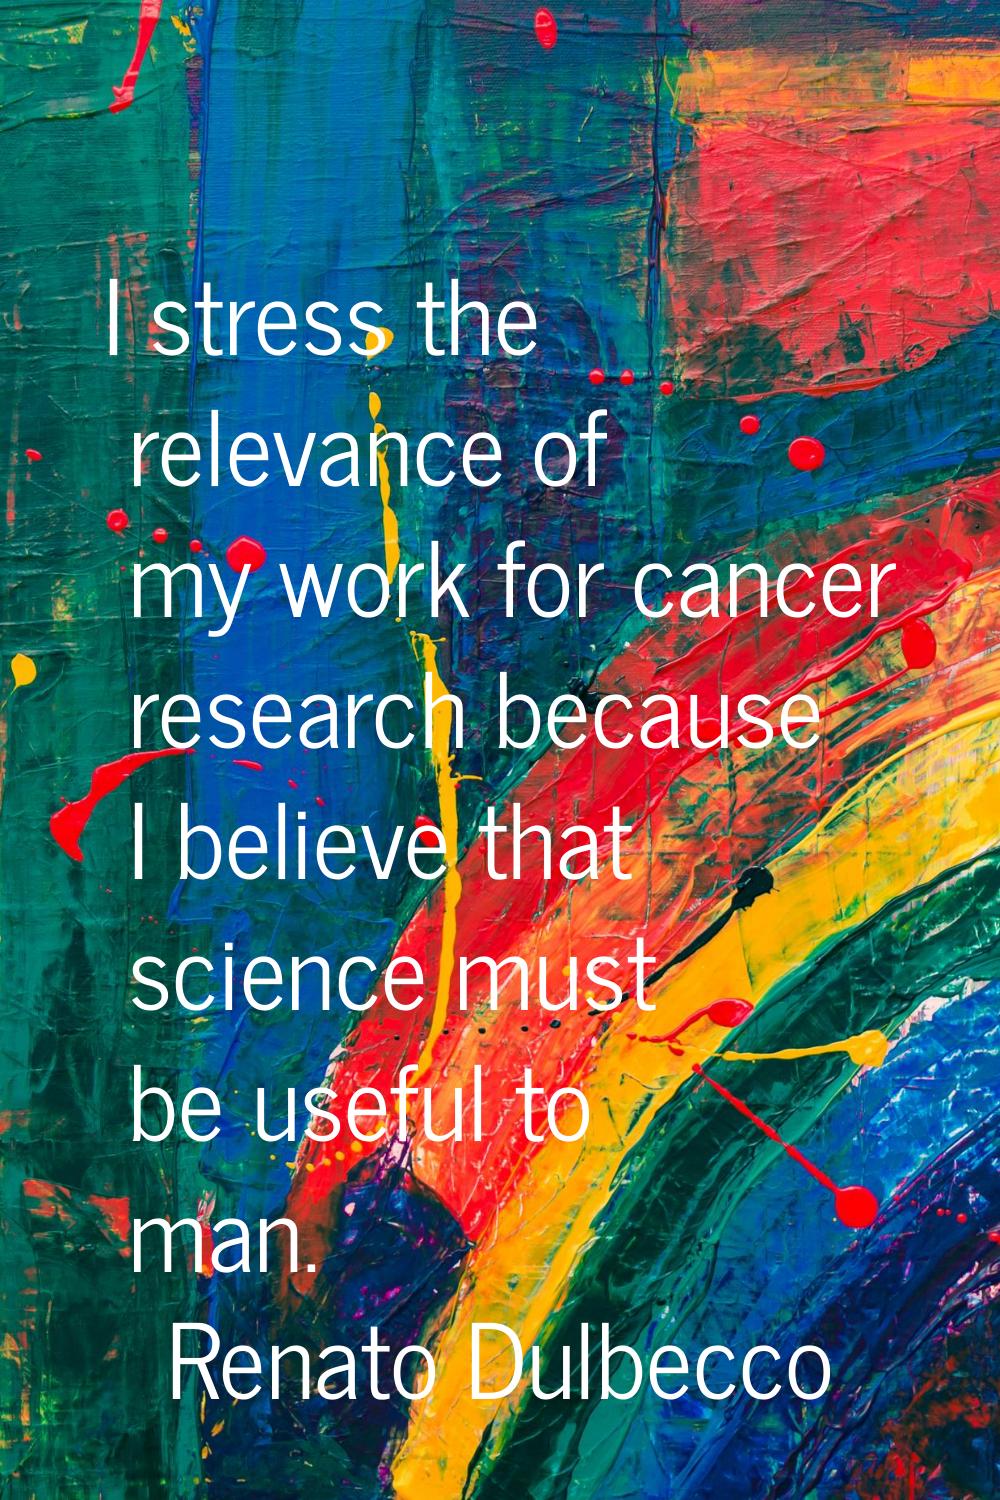 I stress the relevance of my work for cancer research because I believe that science must be useful